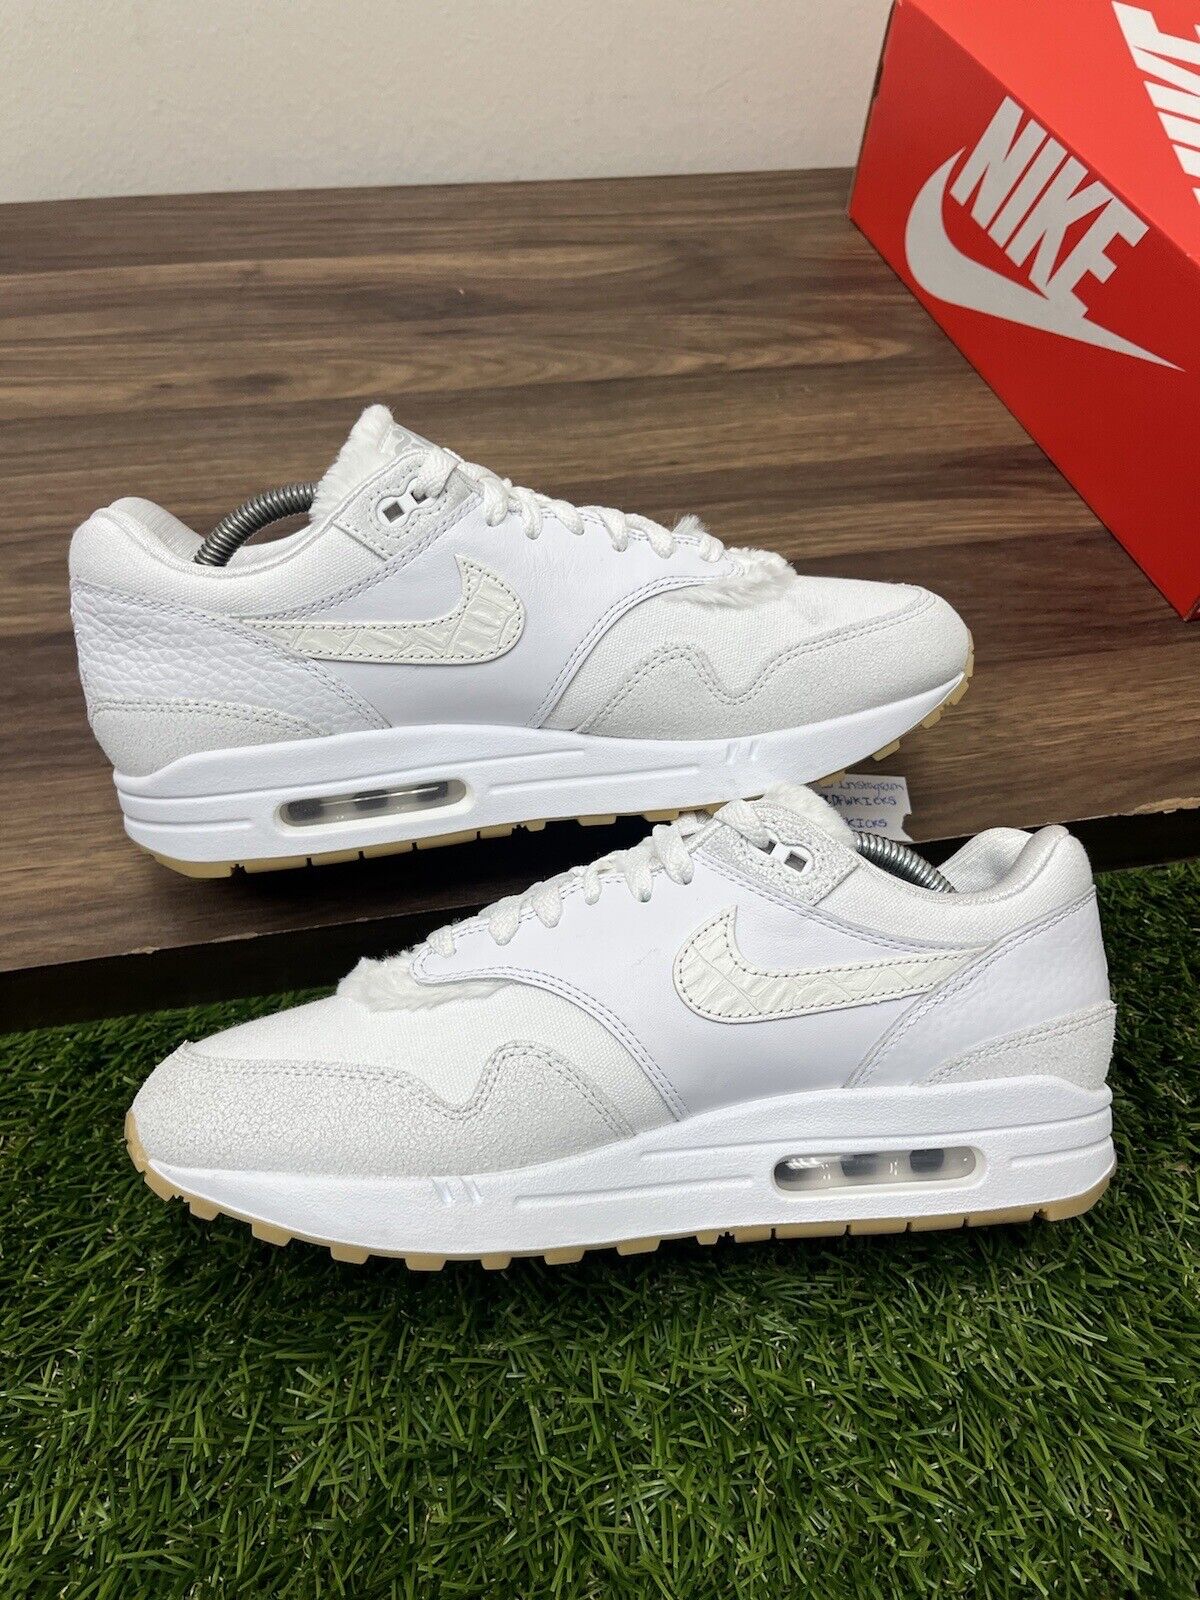 Size 9 - Nike Air Max 1 Low Nike Coast Pack - The Bay